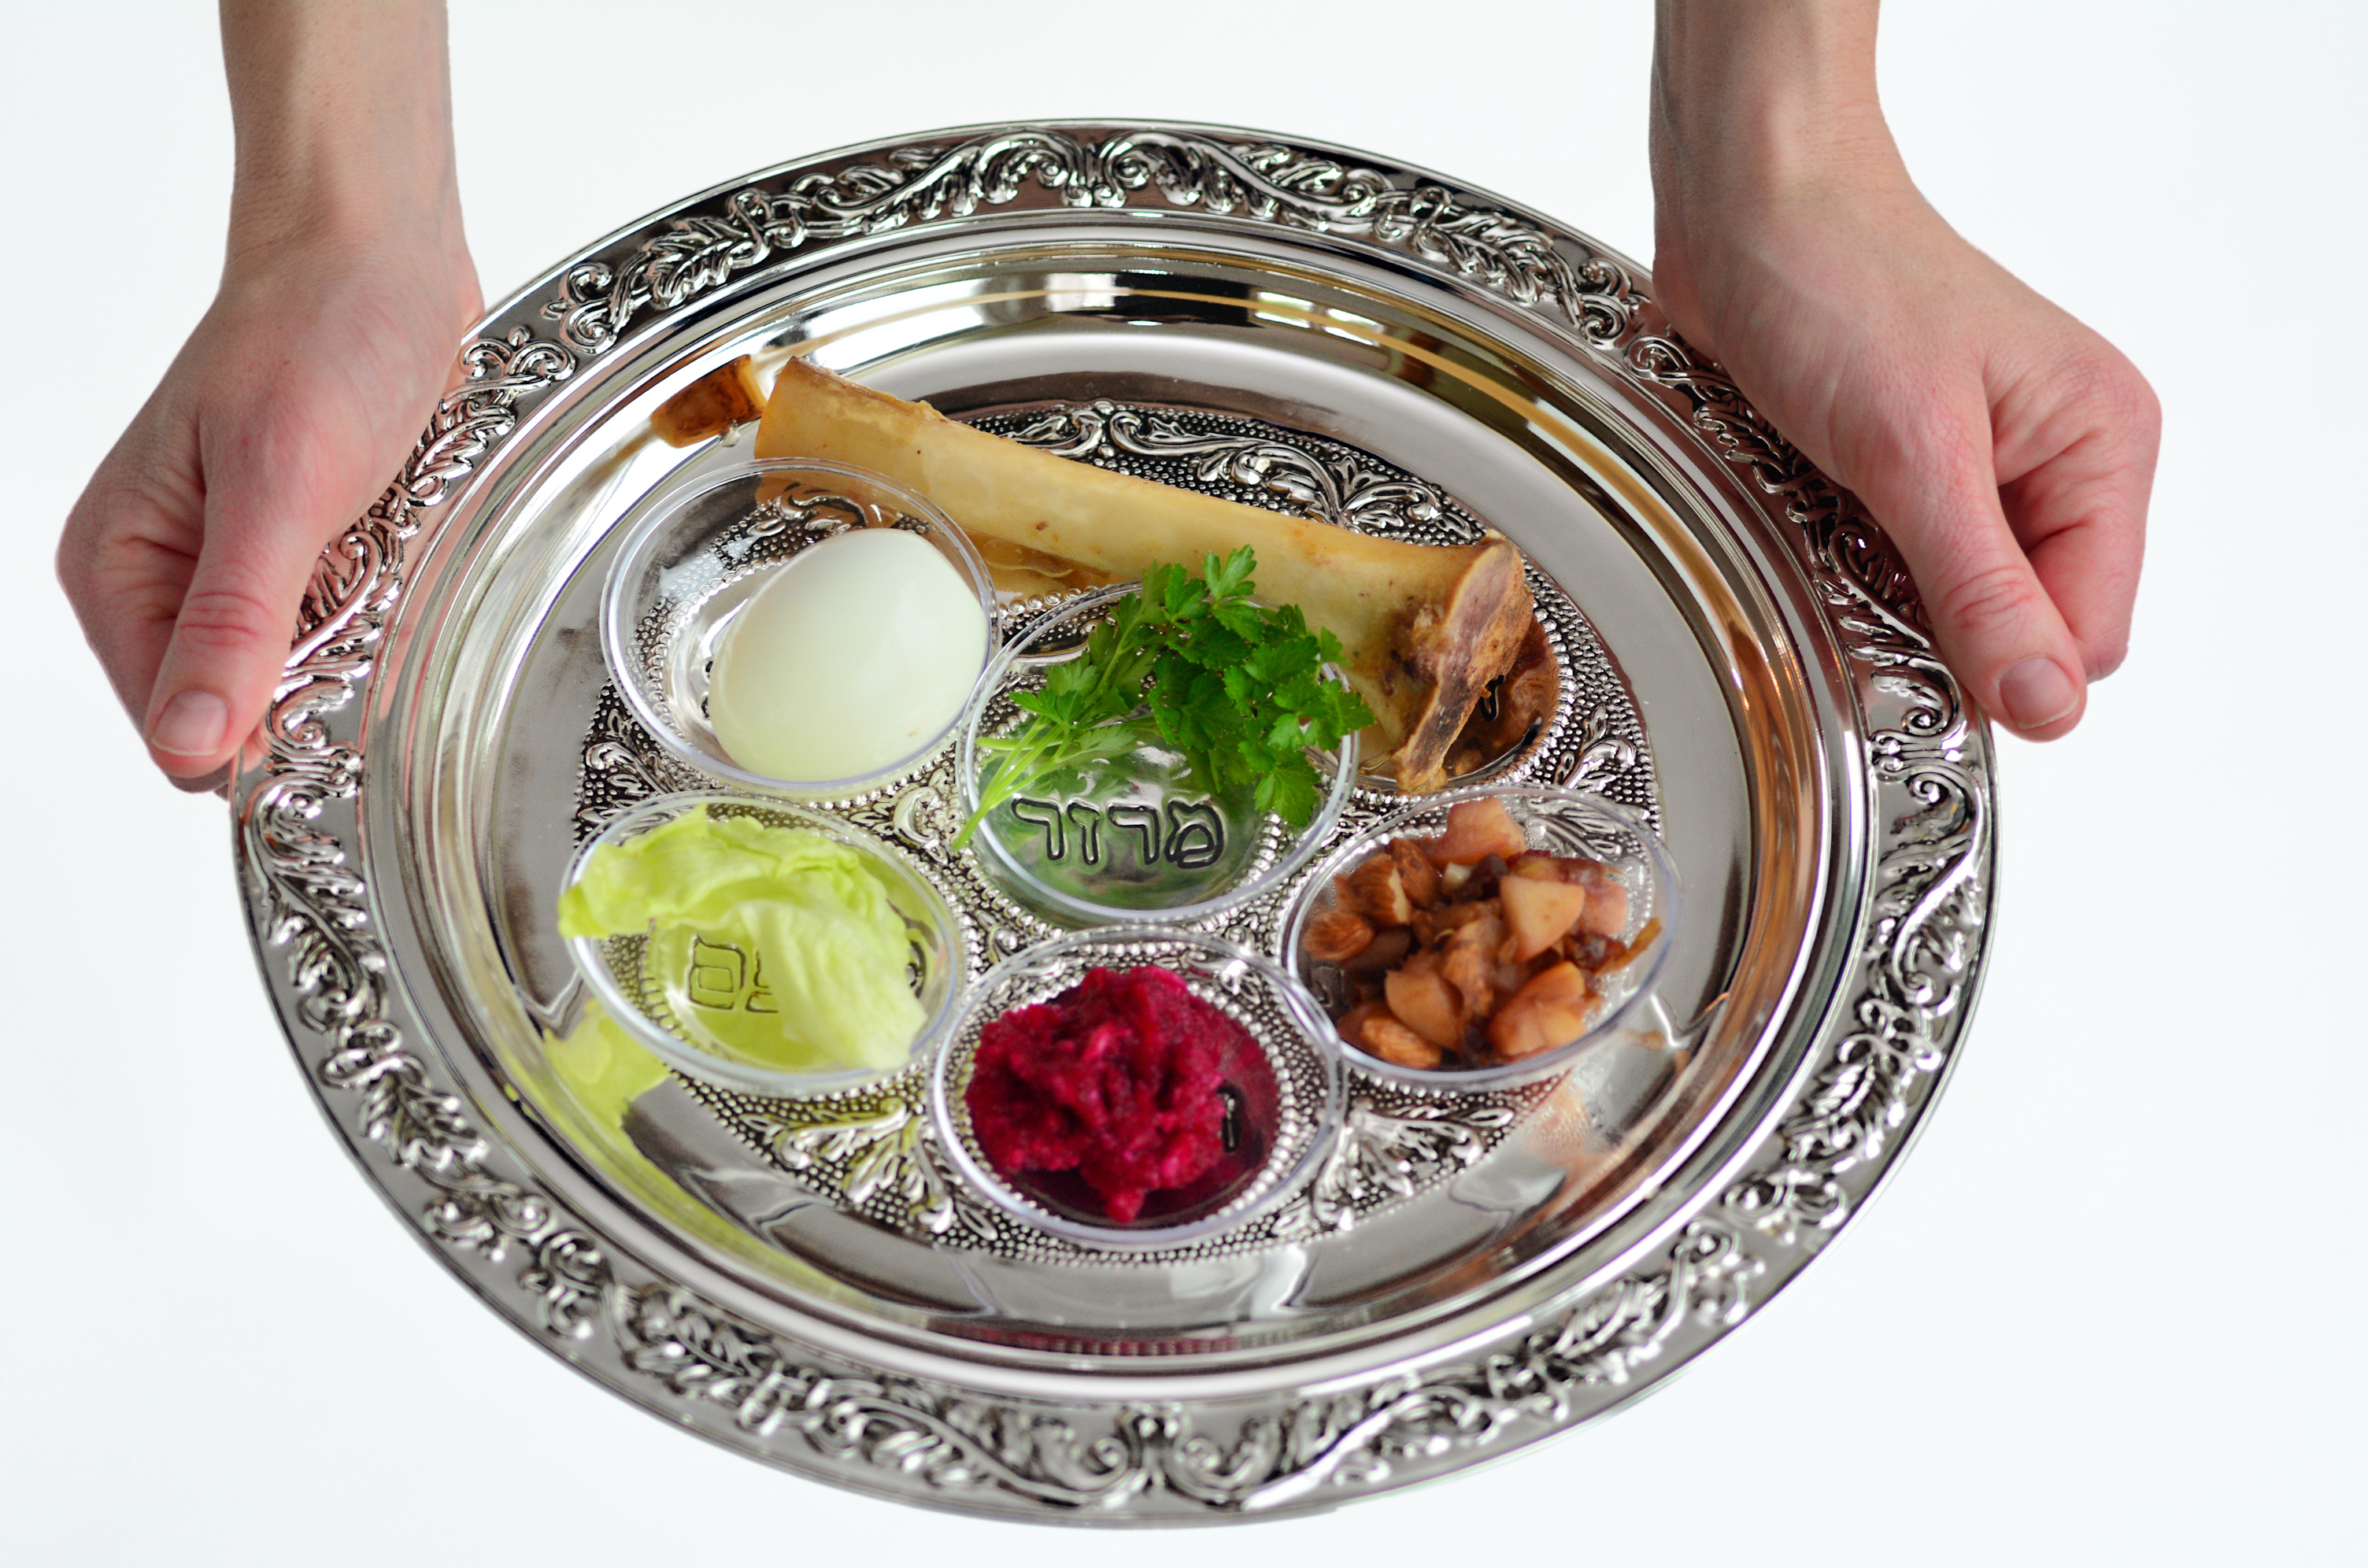 The Passover Seder Plate More Than Just a Judaic Centerpiece FFactor